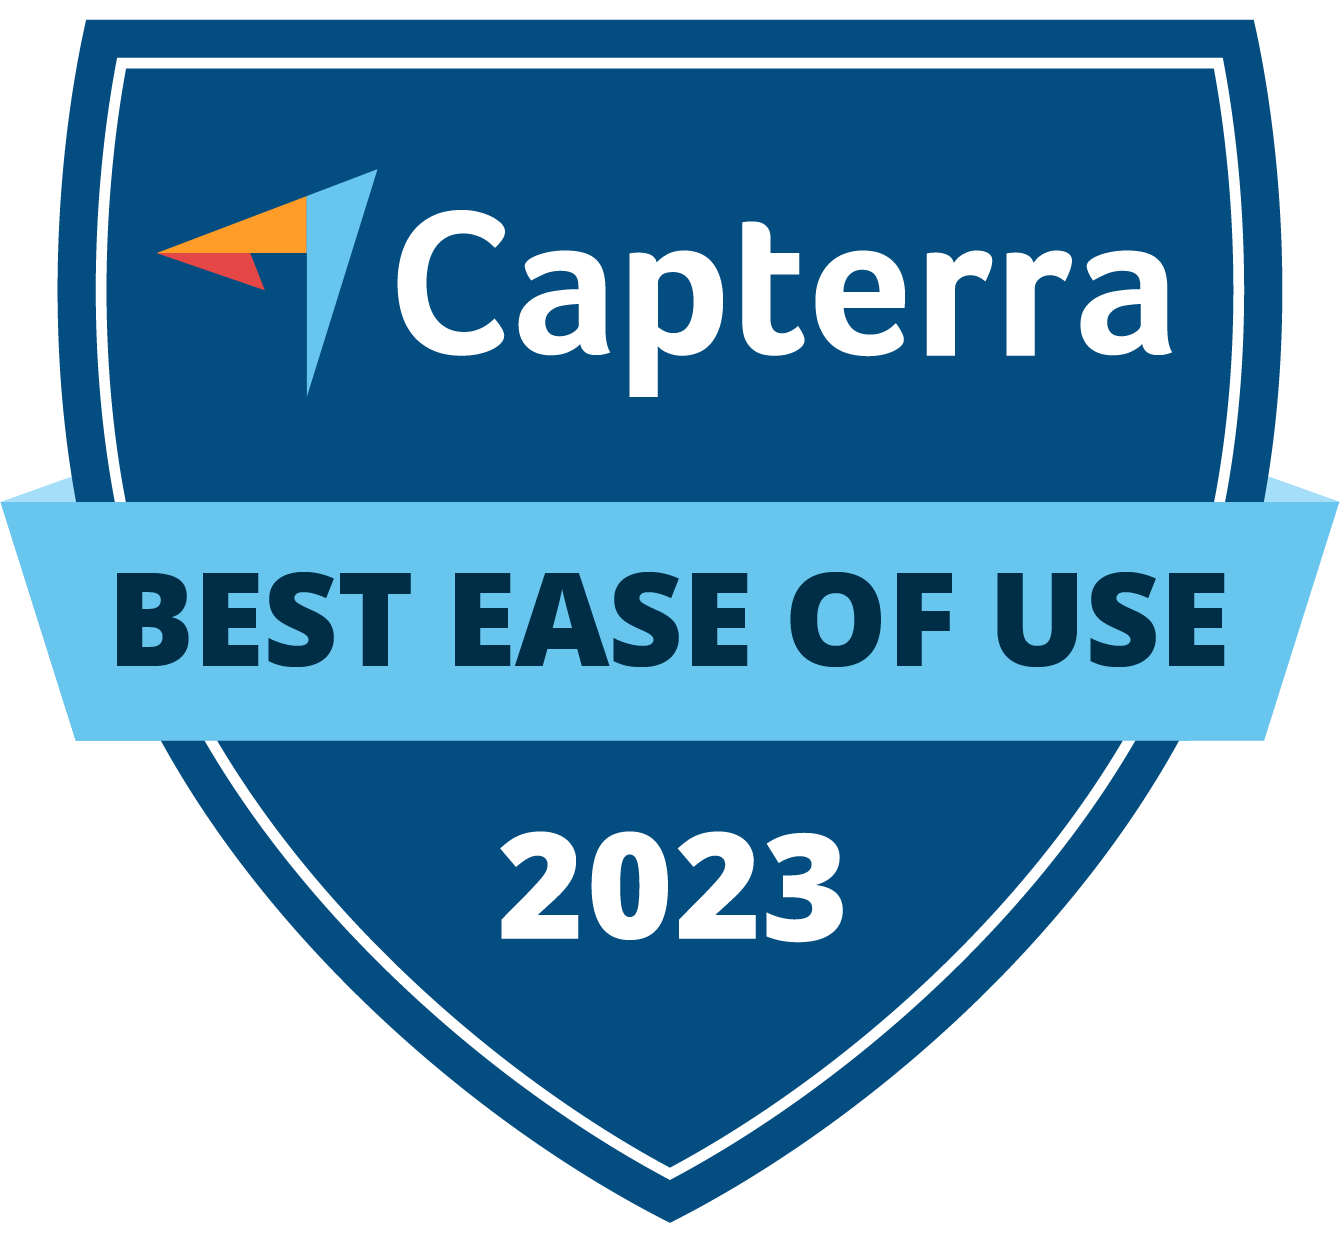 Best ease of use badge from Capterra to truein for the year 2023